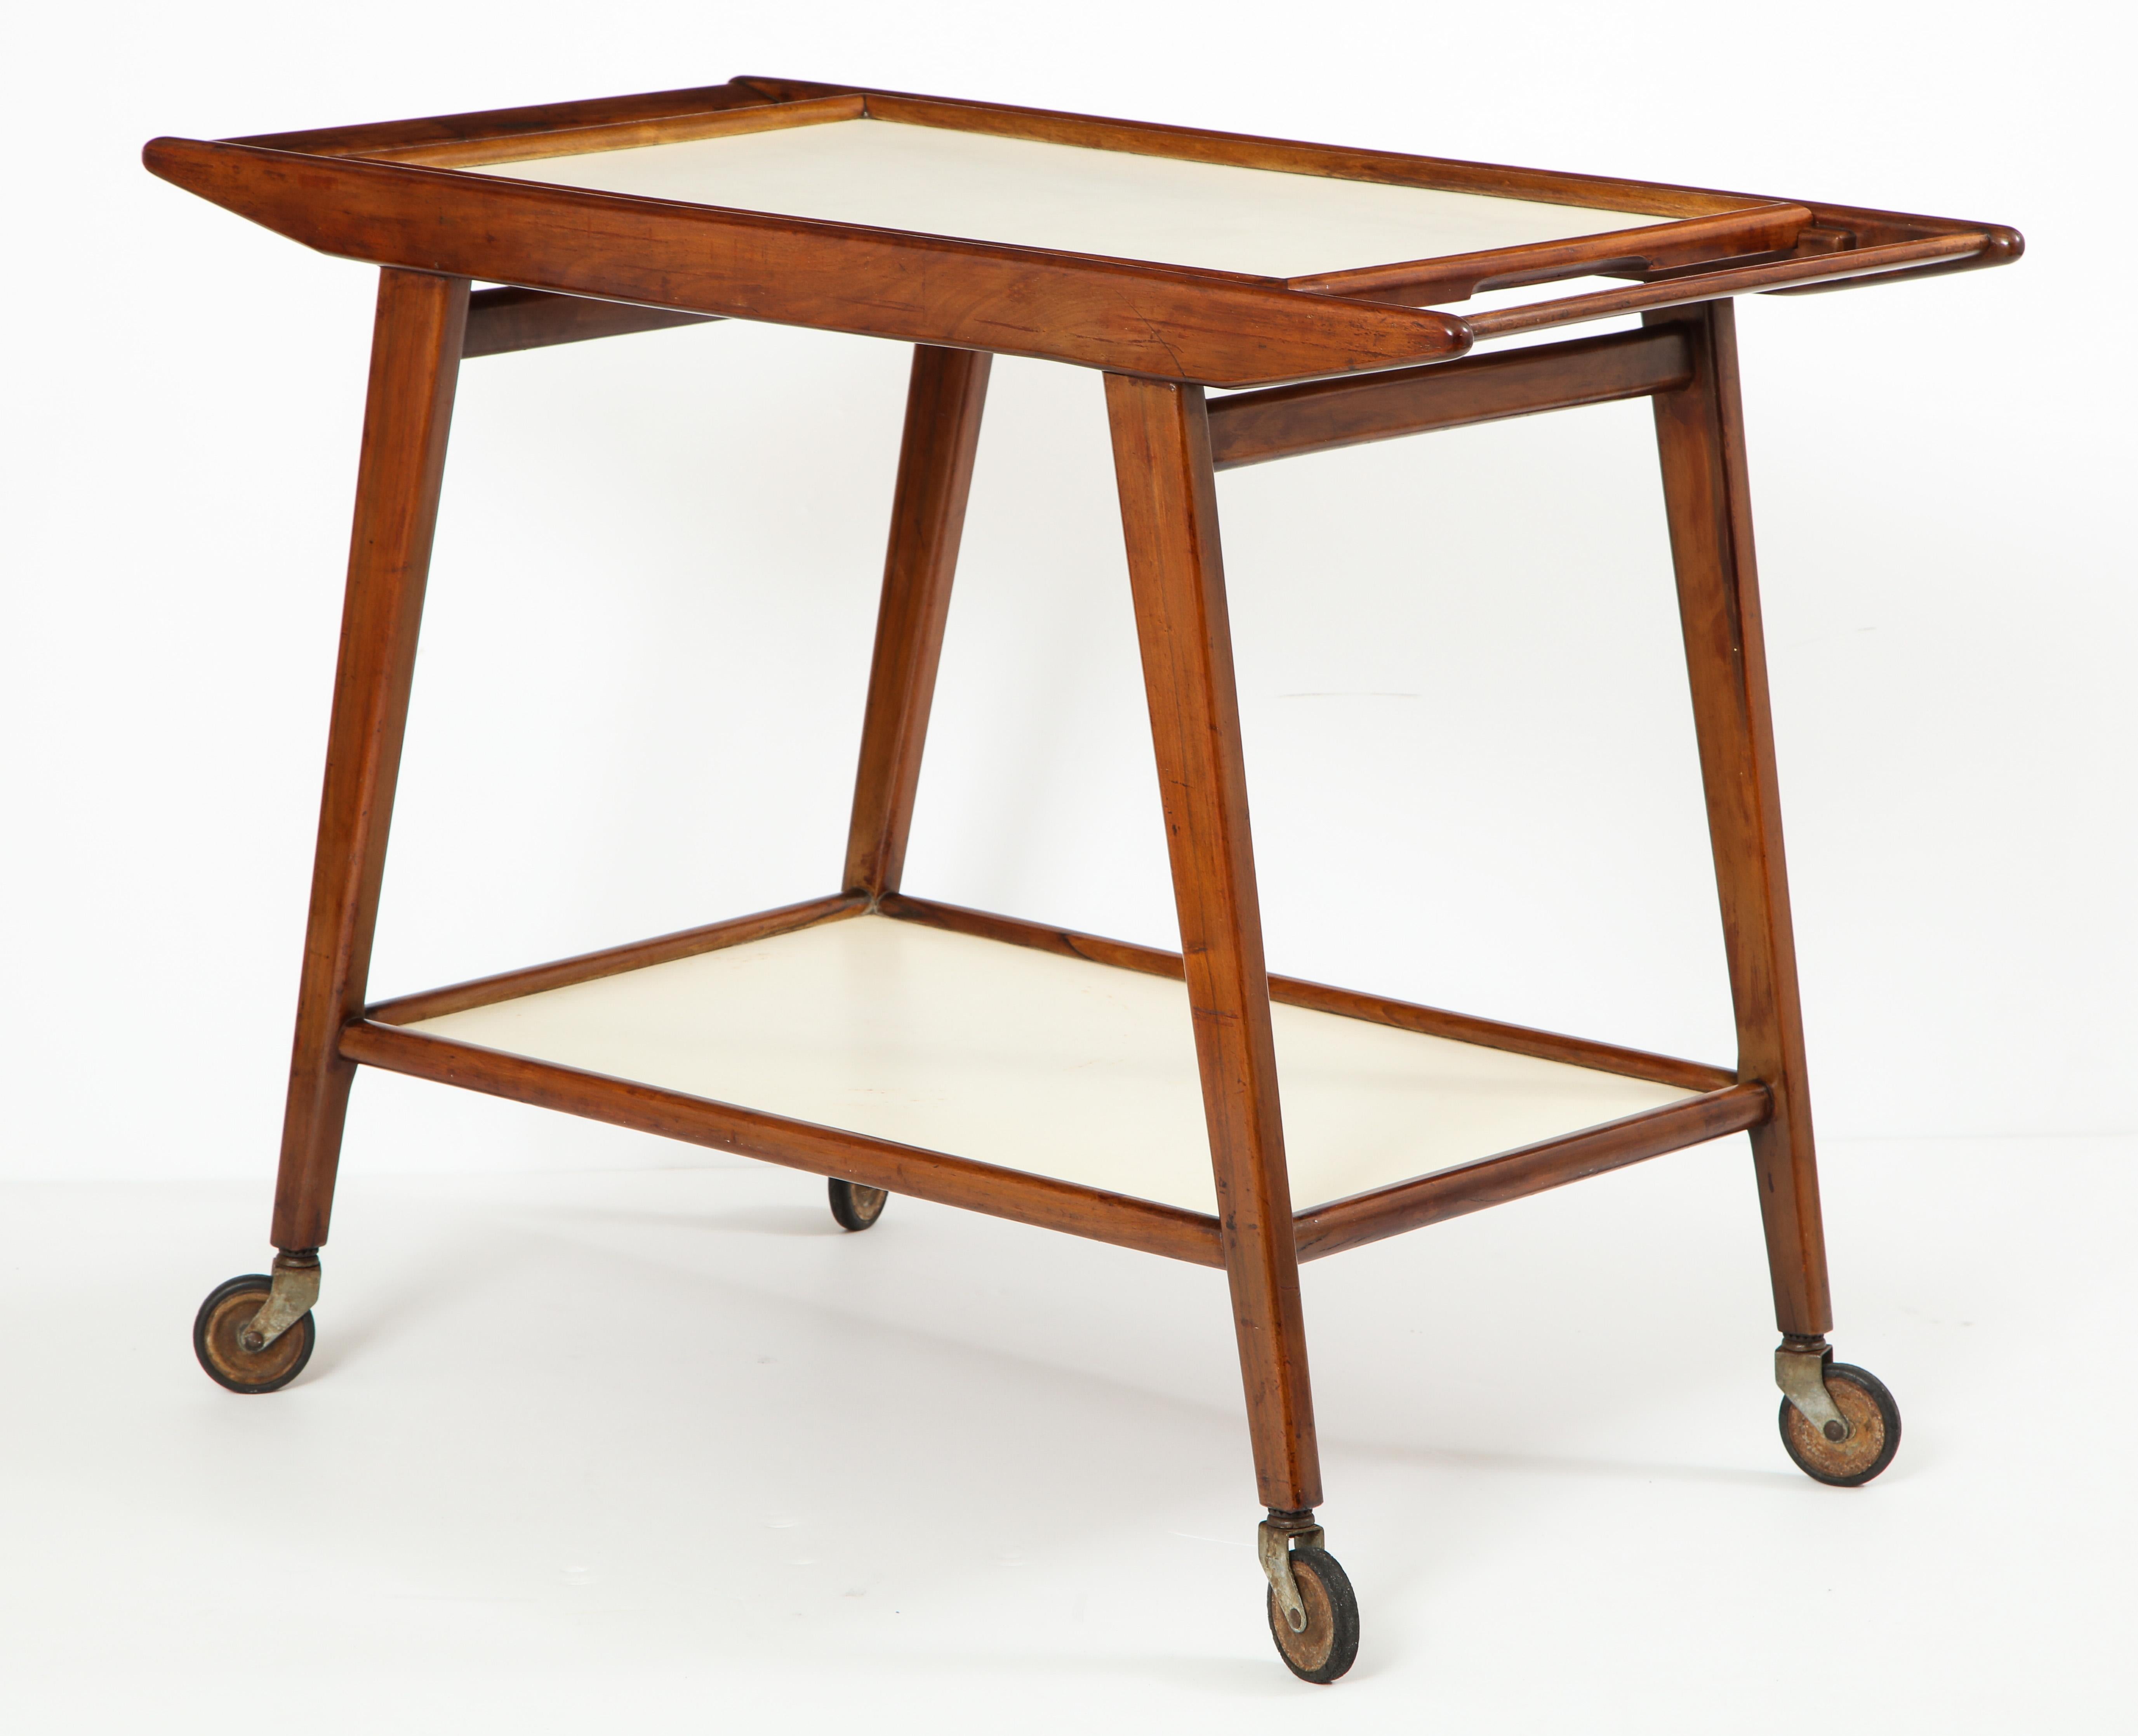 Mid-Century Modern Brazilian tea cart in solid hardwood with removable tray in white formica by OCA Manufacture.

This elegant wheeled tea-cart or bar-cart was produced in the 1950s by OCA Brazil Manufacture. It features two trays in white formica -